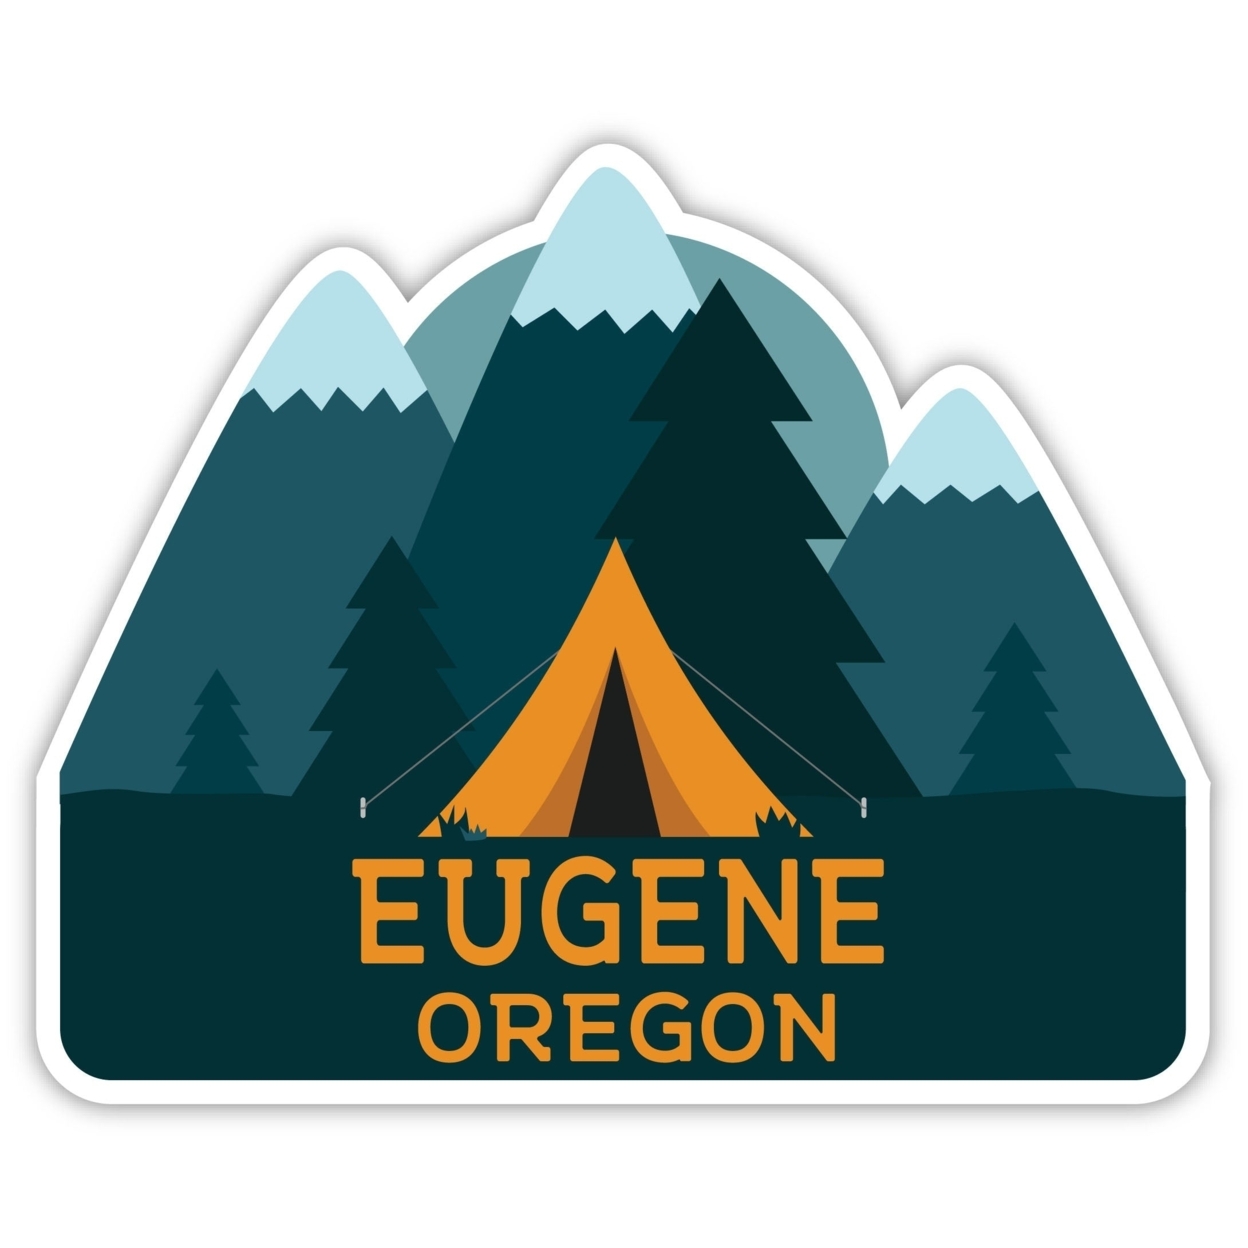 Eugene Oregon Souvenir Decorative Stickers (Choose Theme And Size) - 4-Pack, 4-Inch, Adventures Awaits